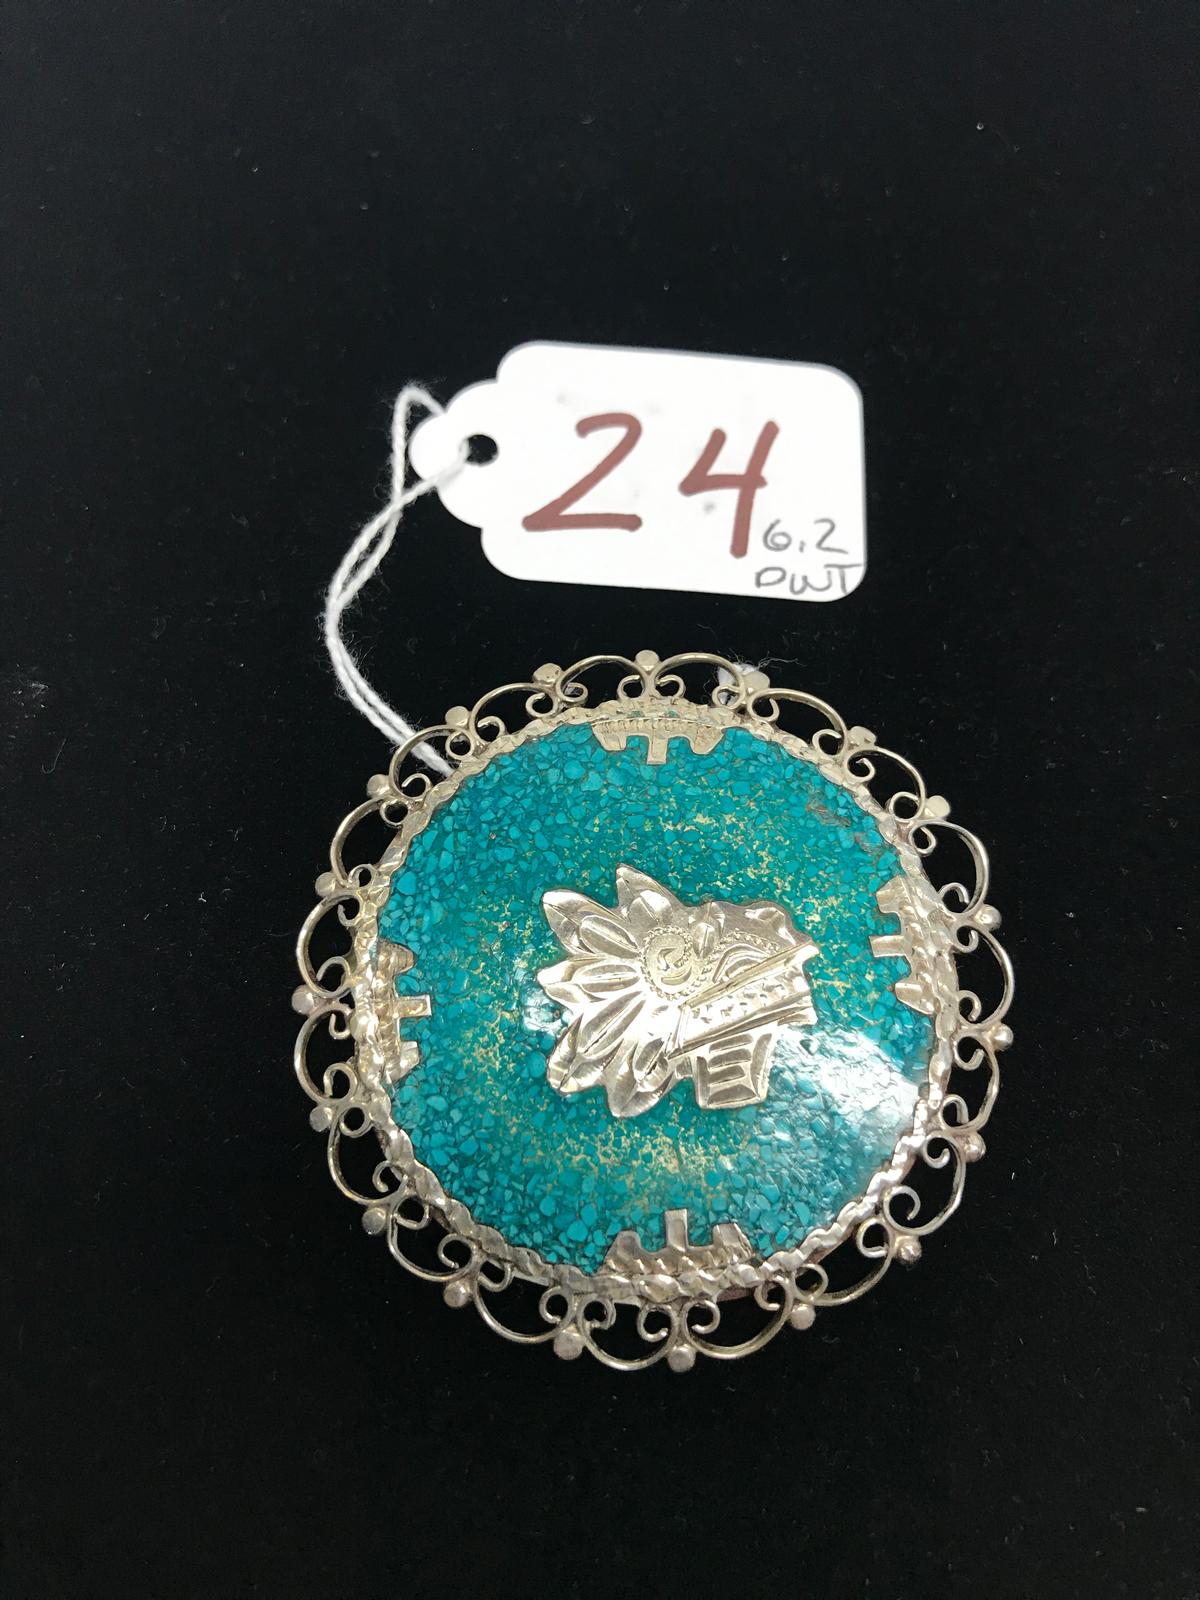 .925 Sterling & Turquoise Pendant/Brooch Pin-6.2 dwt.